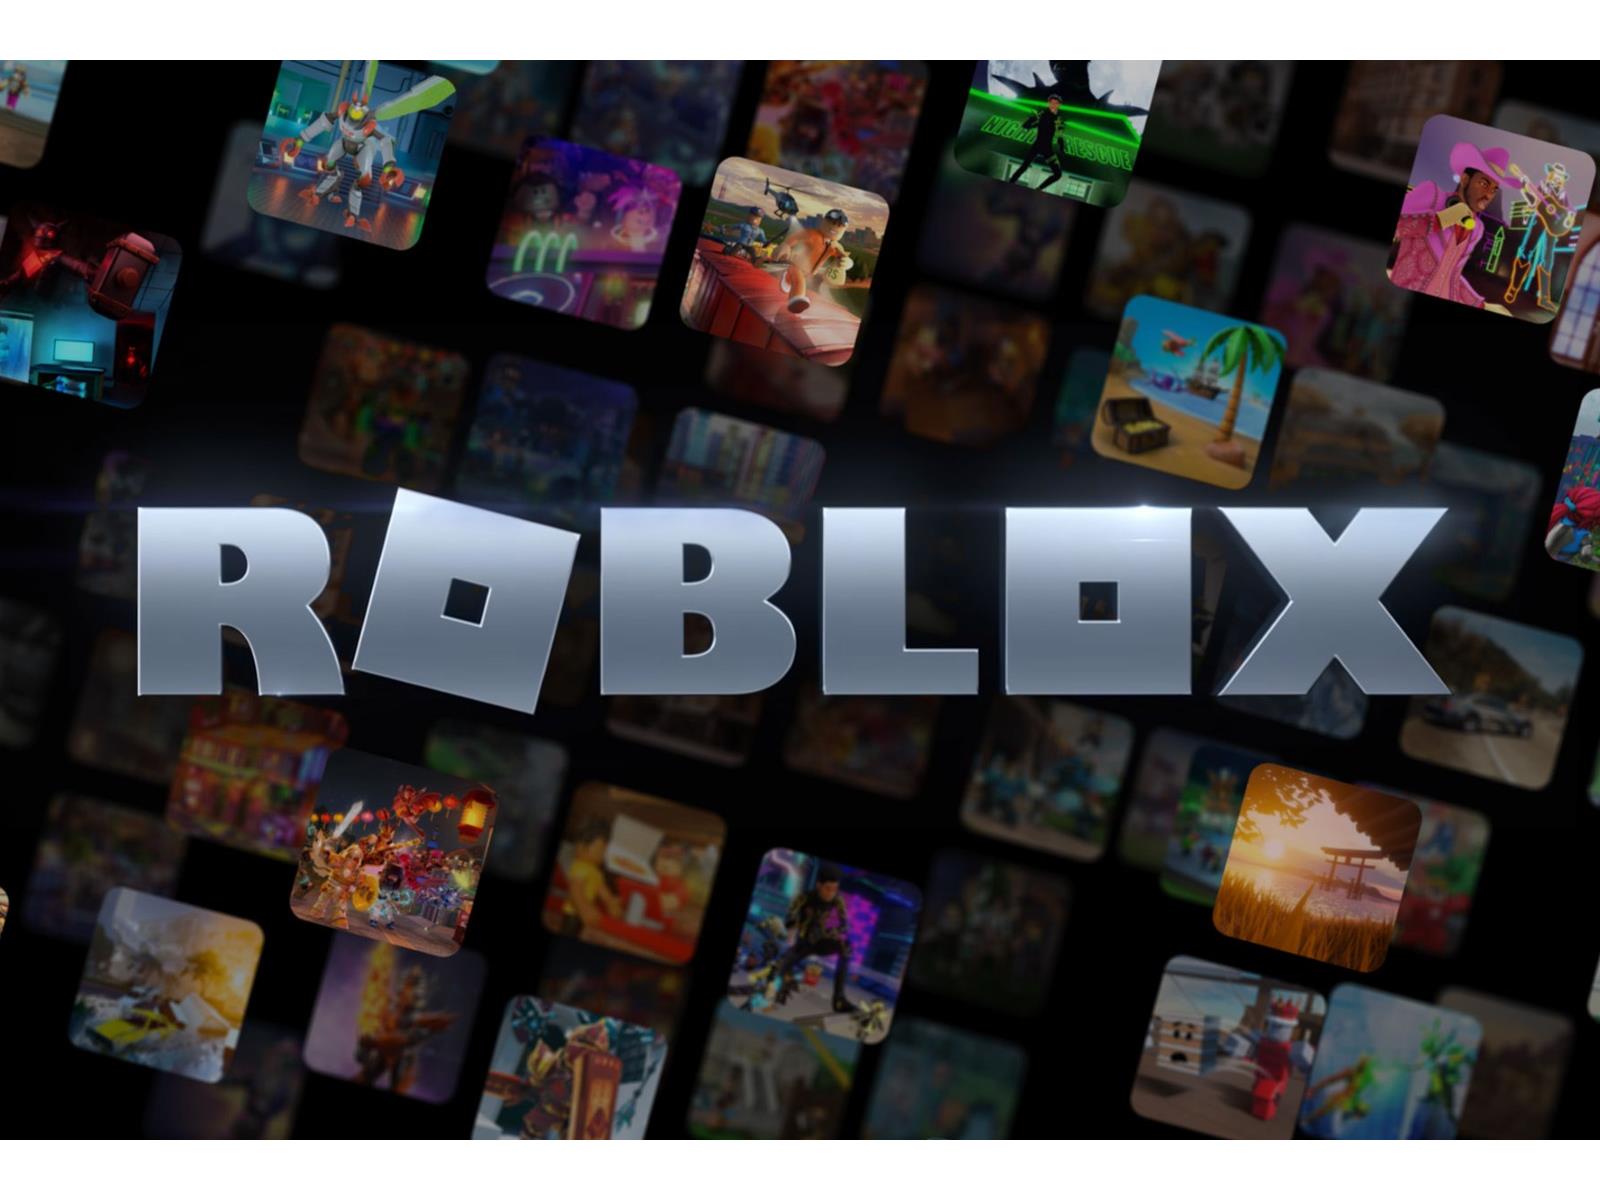 The annual payment to the founder of Roblox may amount to $ 233 million. He  will get it if the company's shares rise